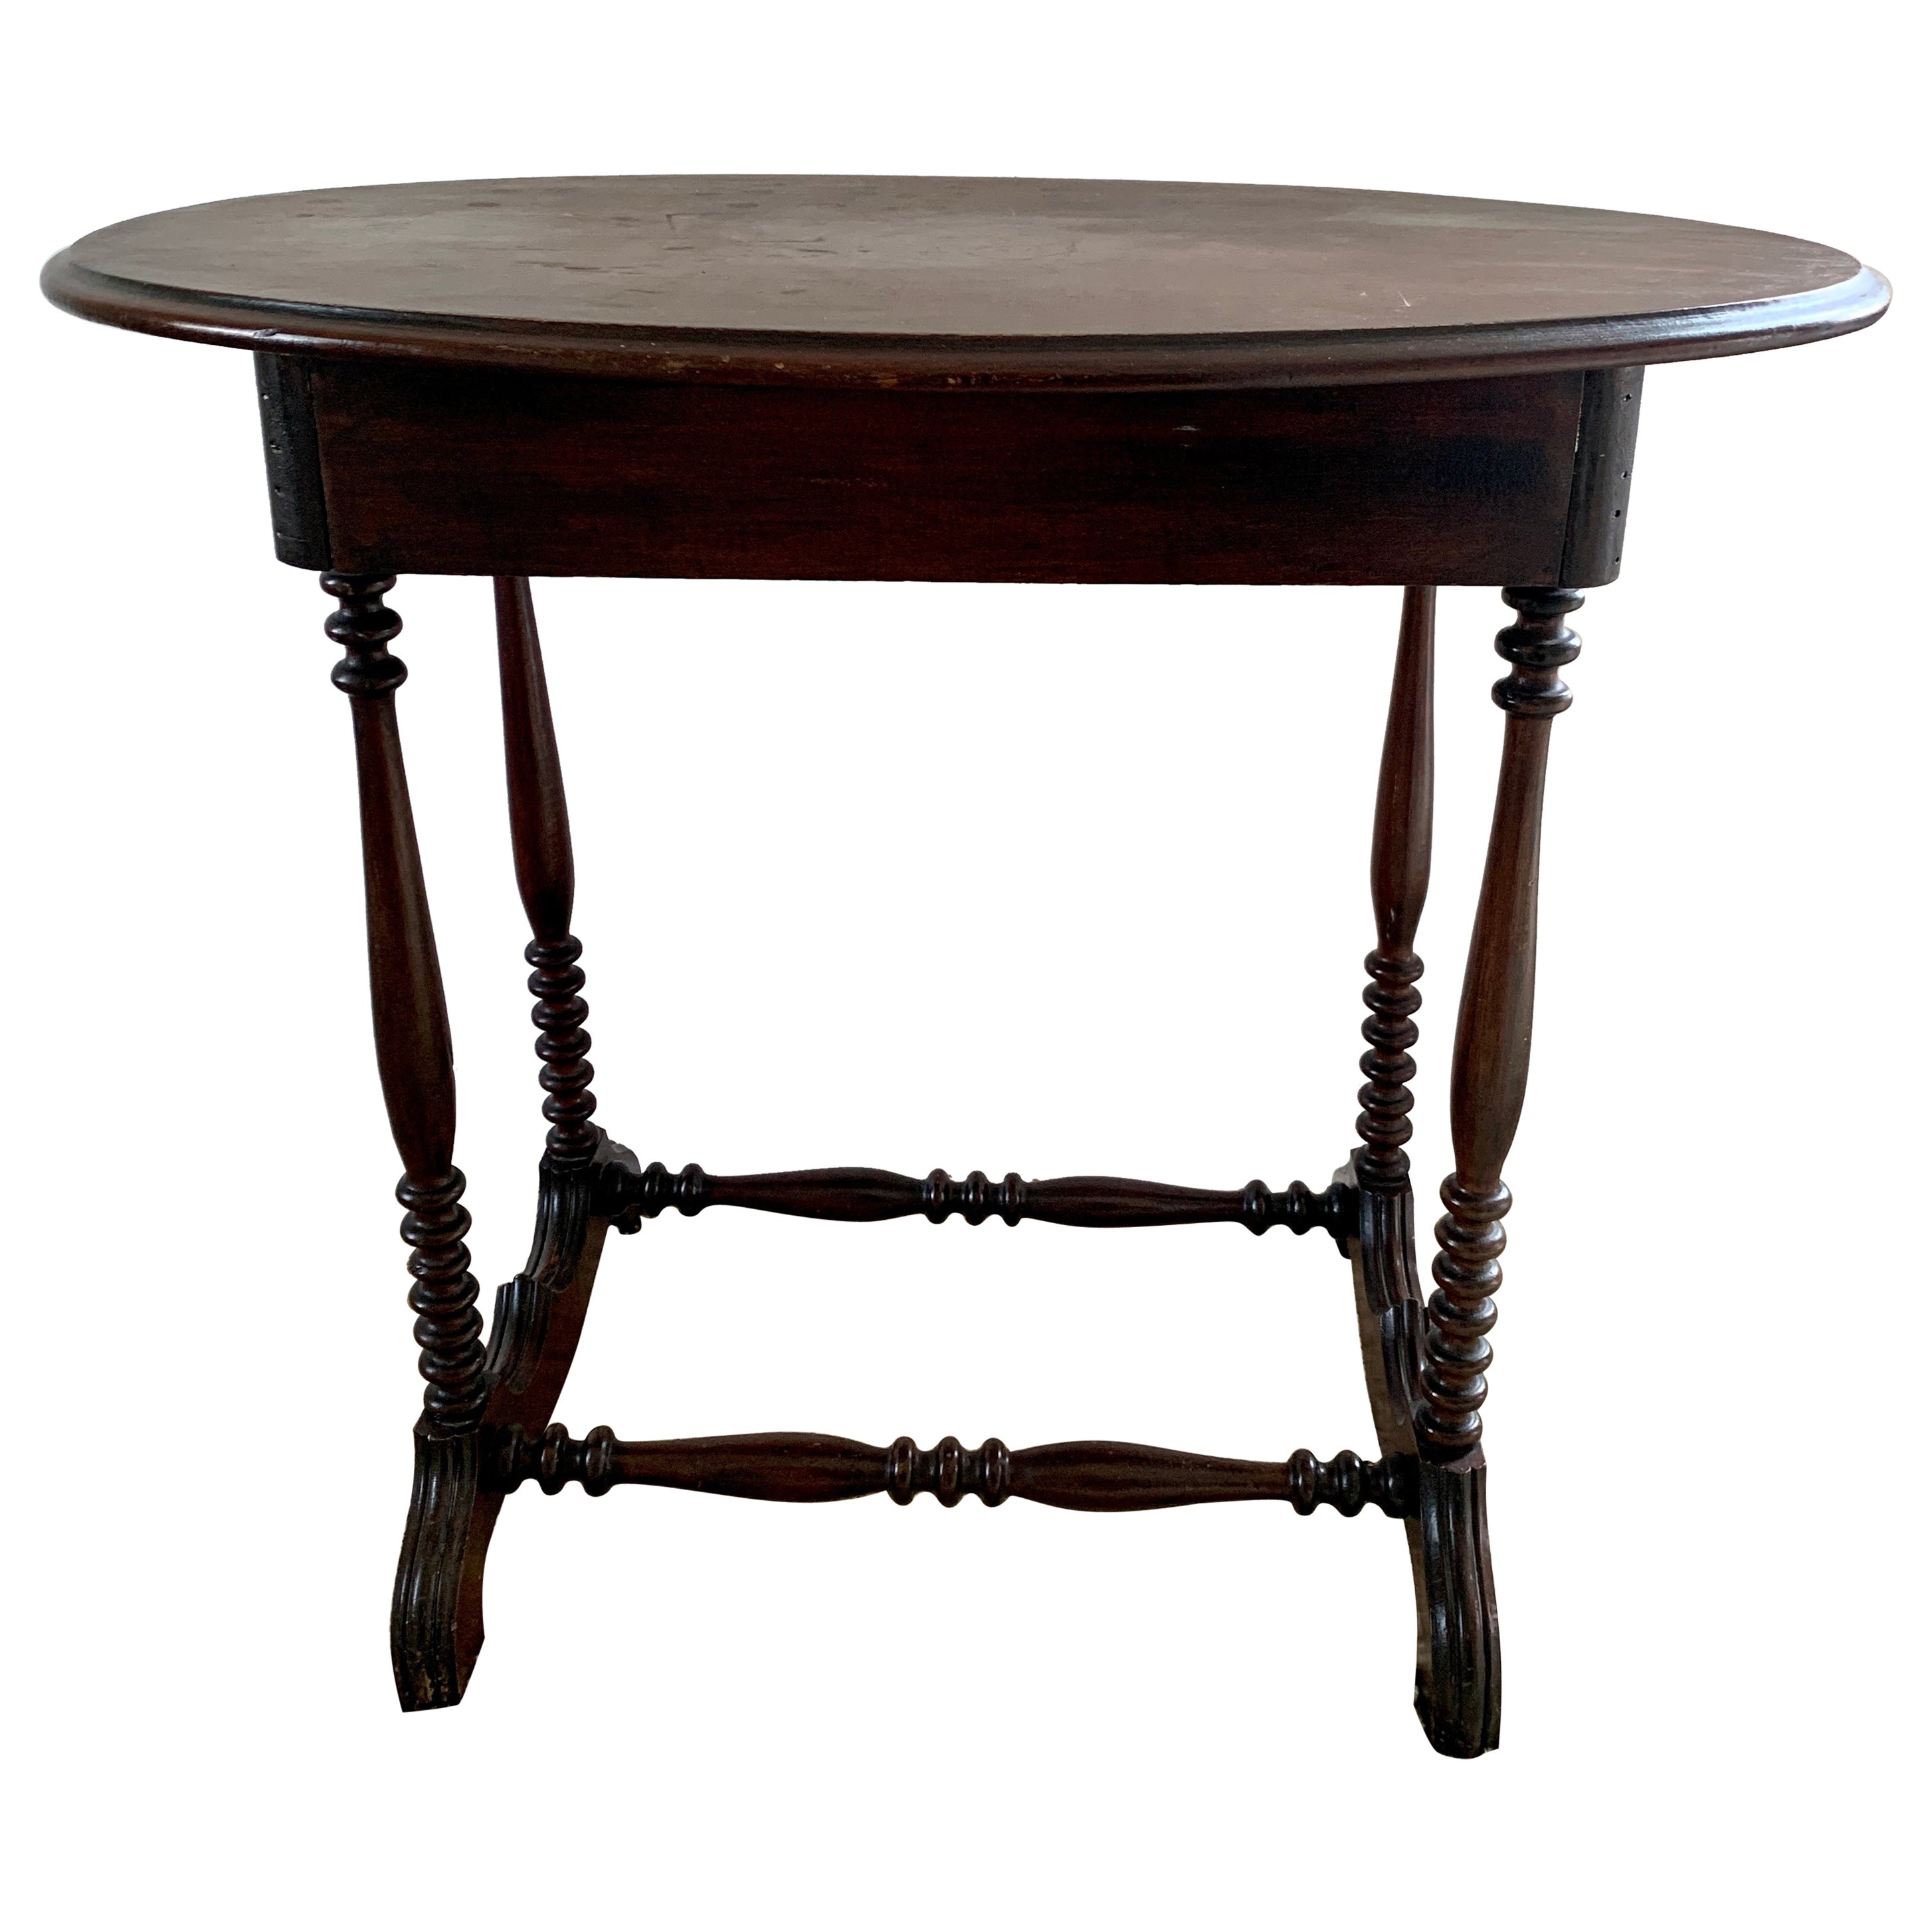 Late 19th Century American Victorian Oval Walnut Side Table